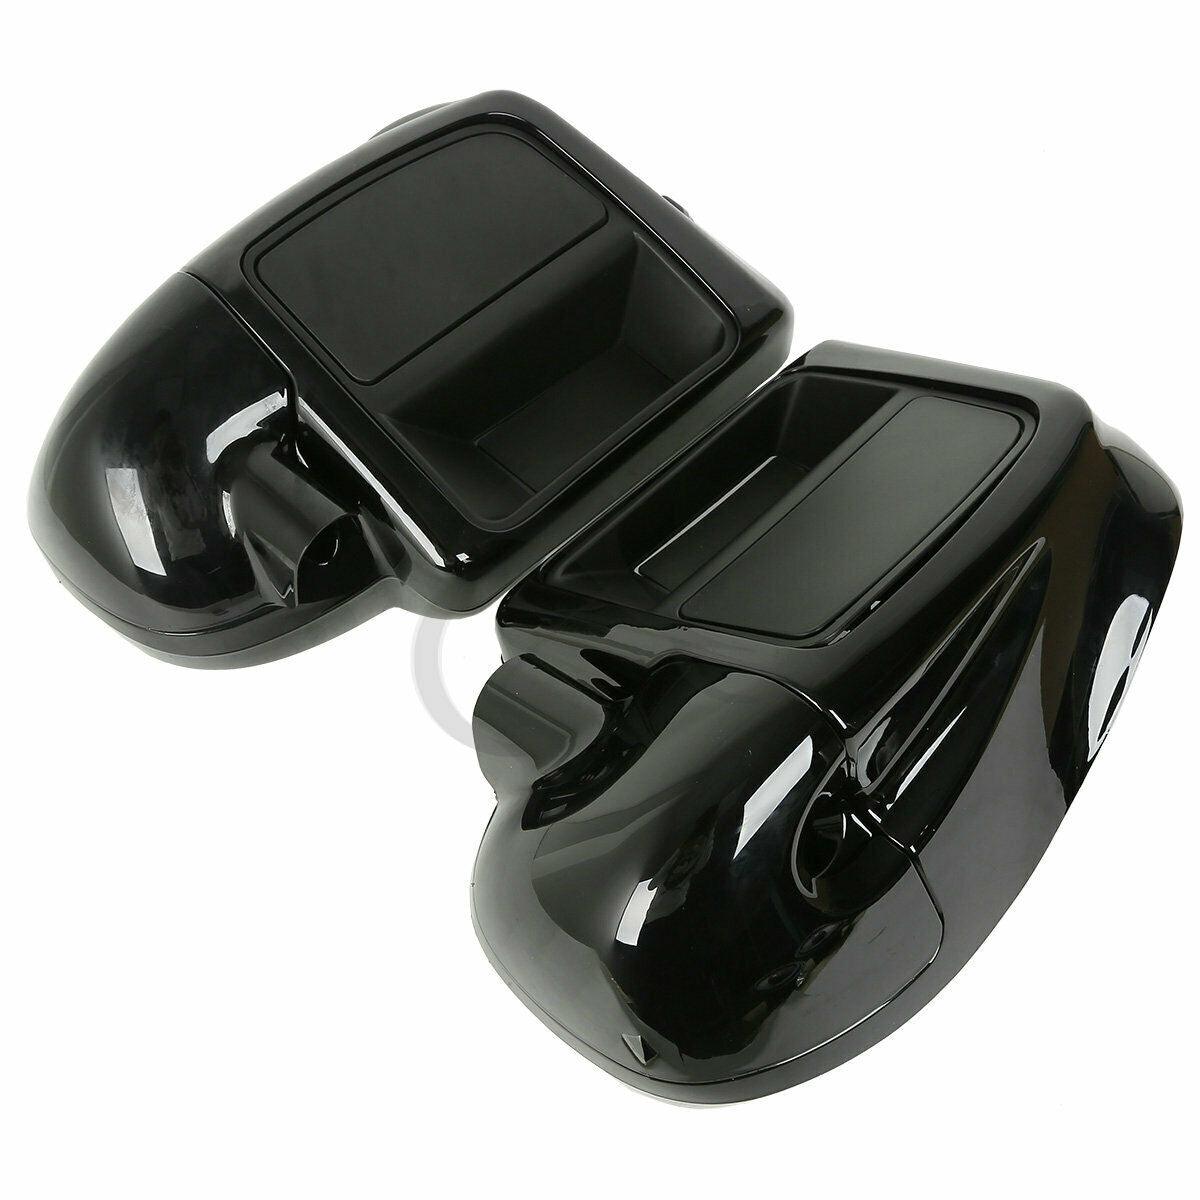 Lower Vented Fairing + 6.5"Speaker Box Pod Fit For Harley Touring Glide FL 14-22 - Moto Life Products